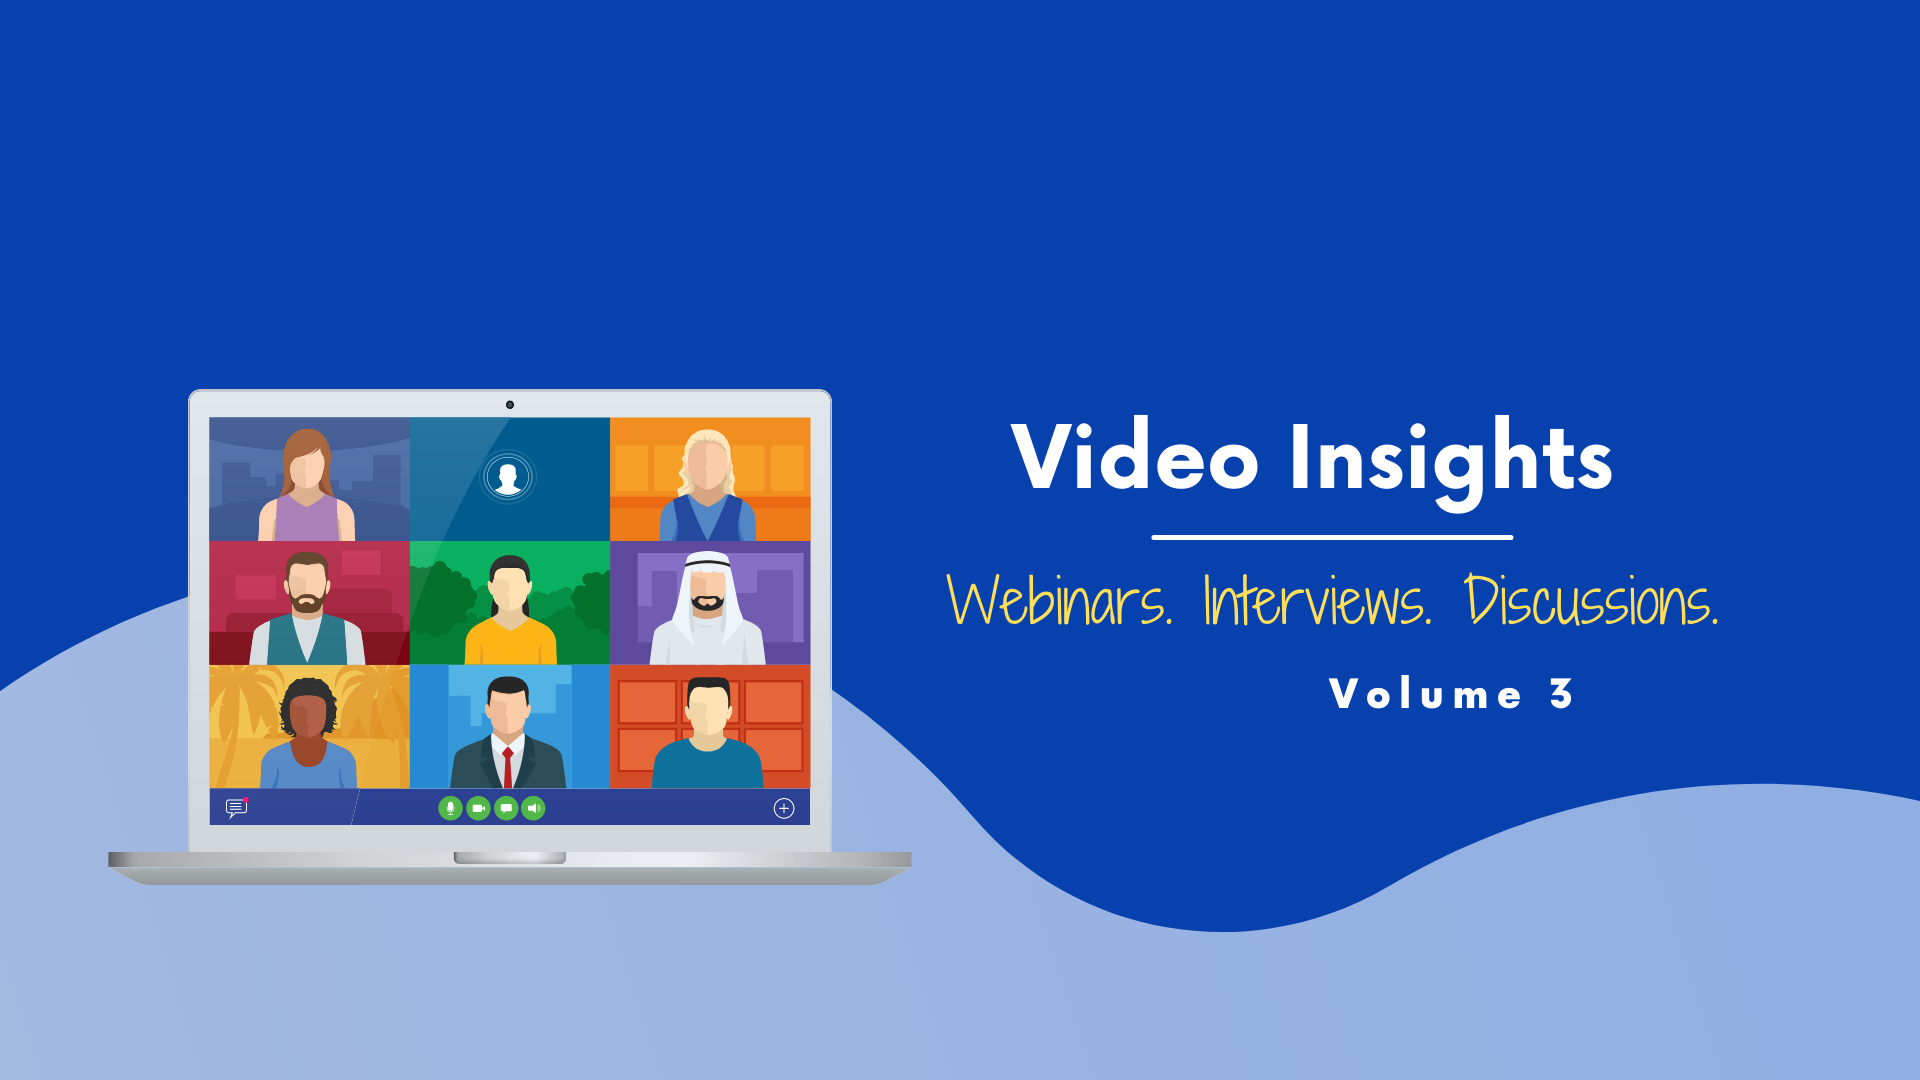 Video Insights: Webinars & Discussions (Volume 3)